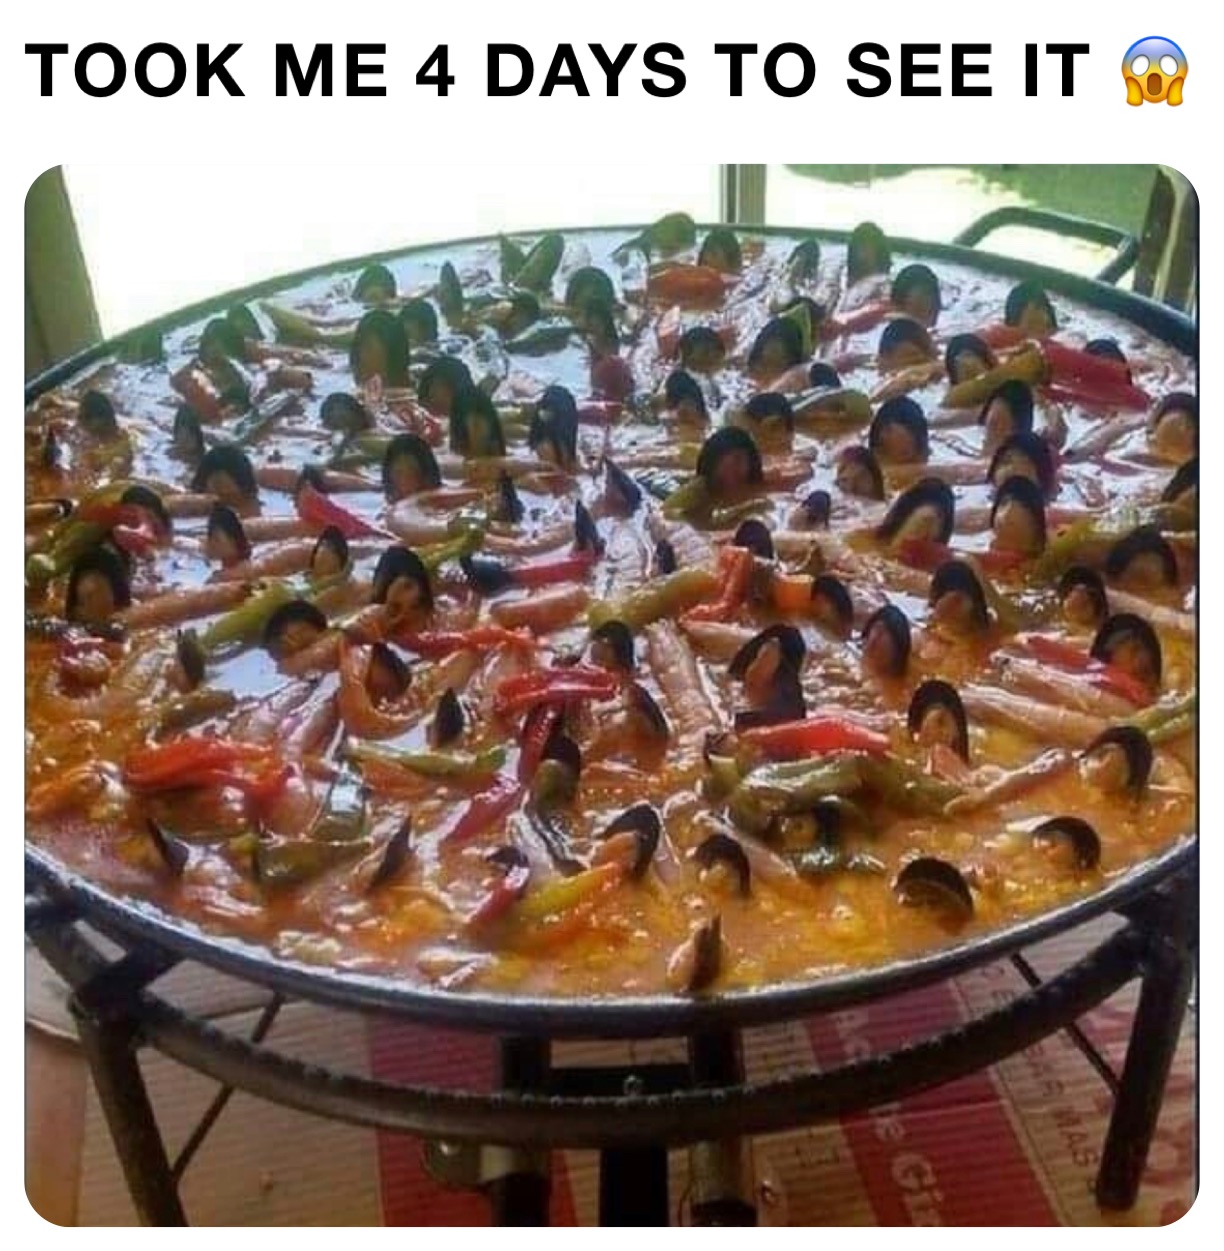 TOOK ME 4 DAYS TO SEE IT 😱